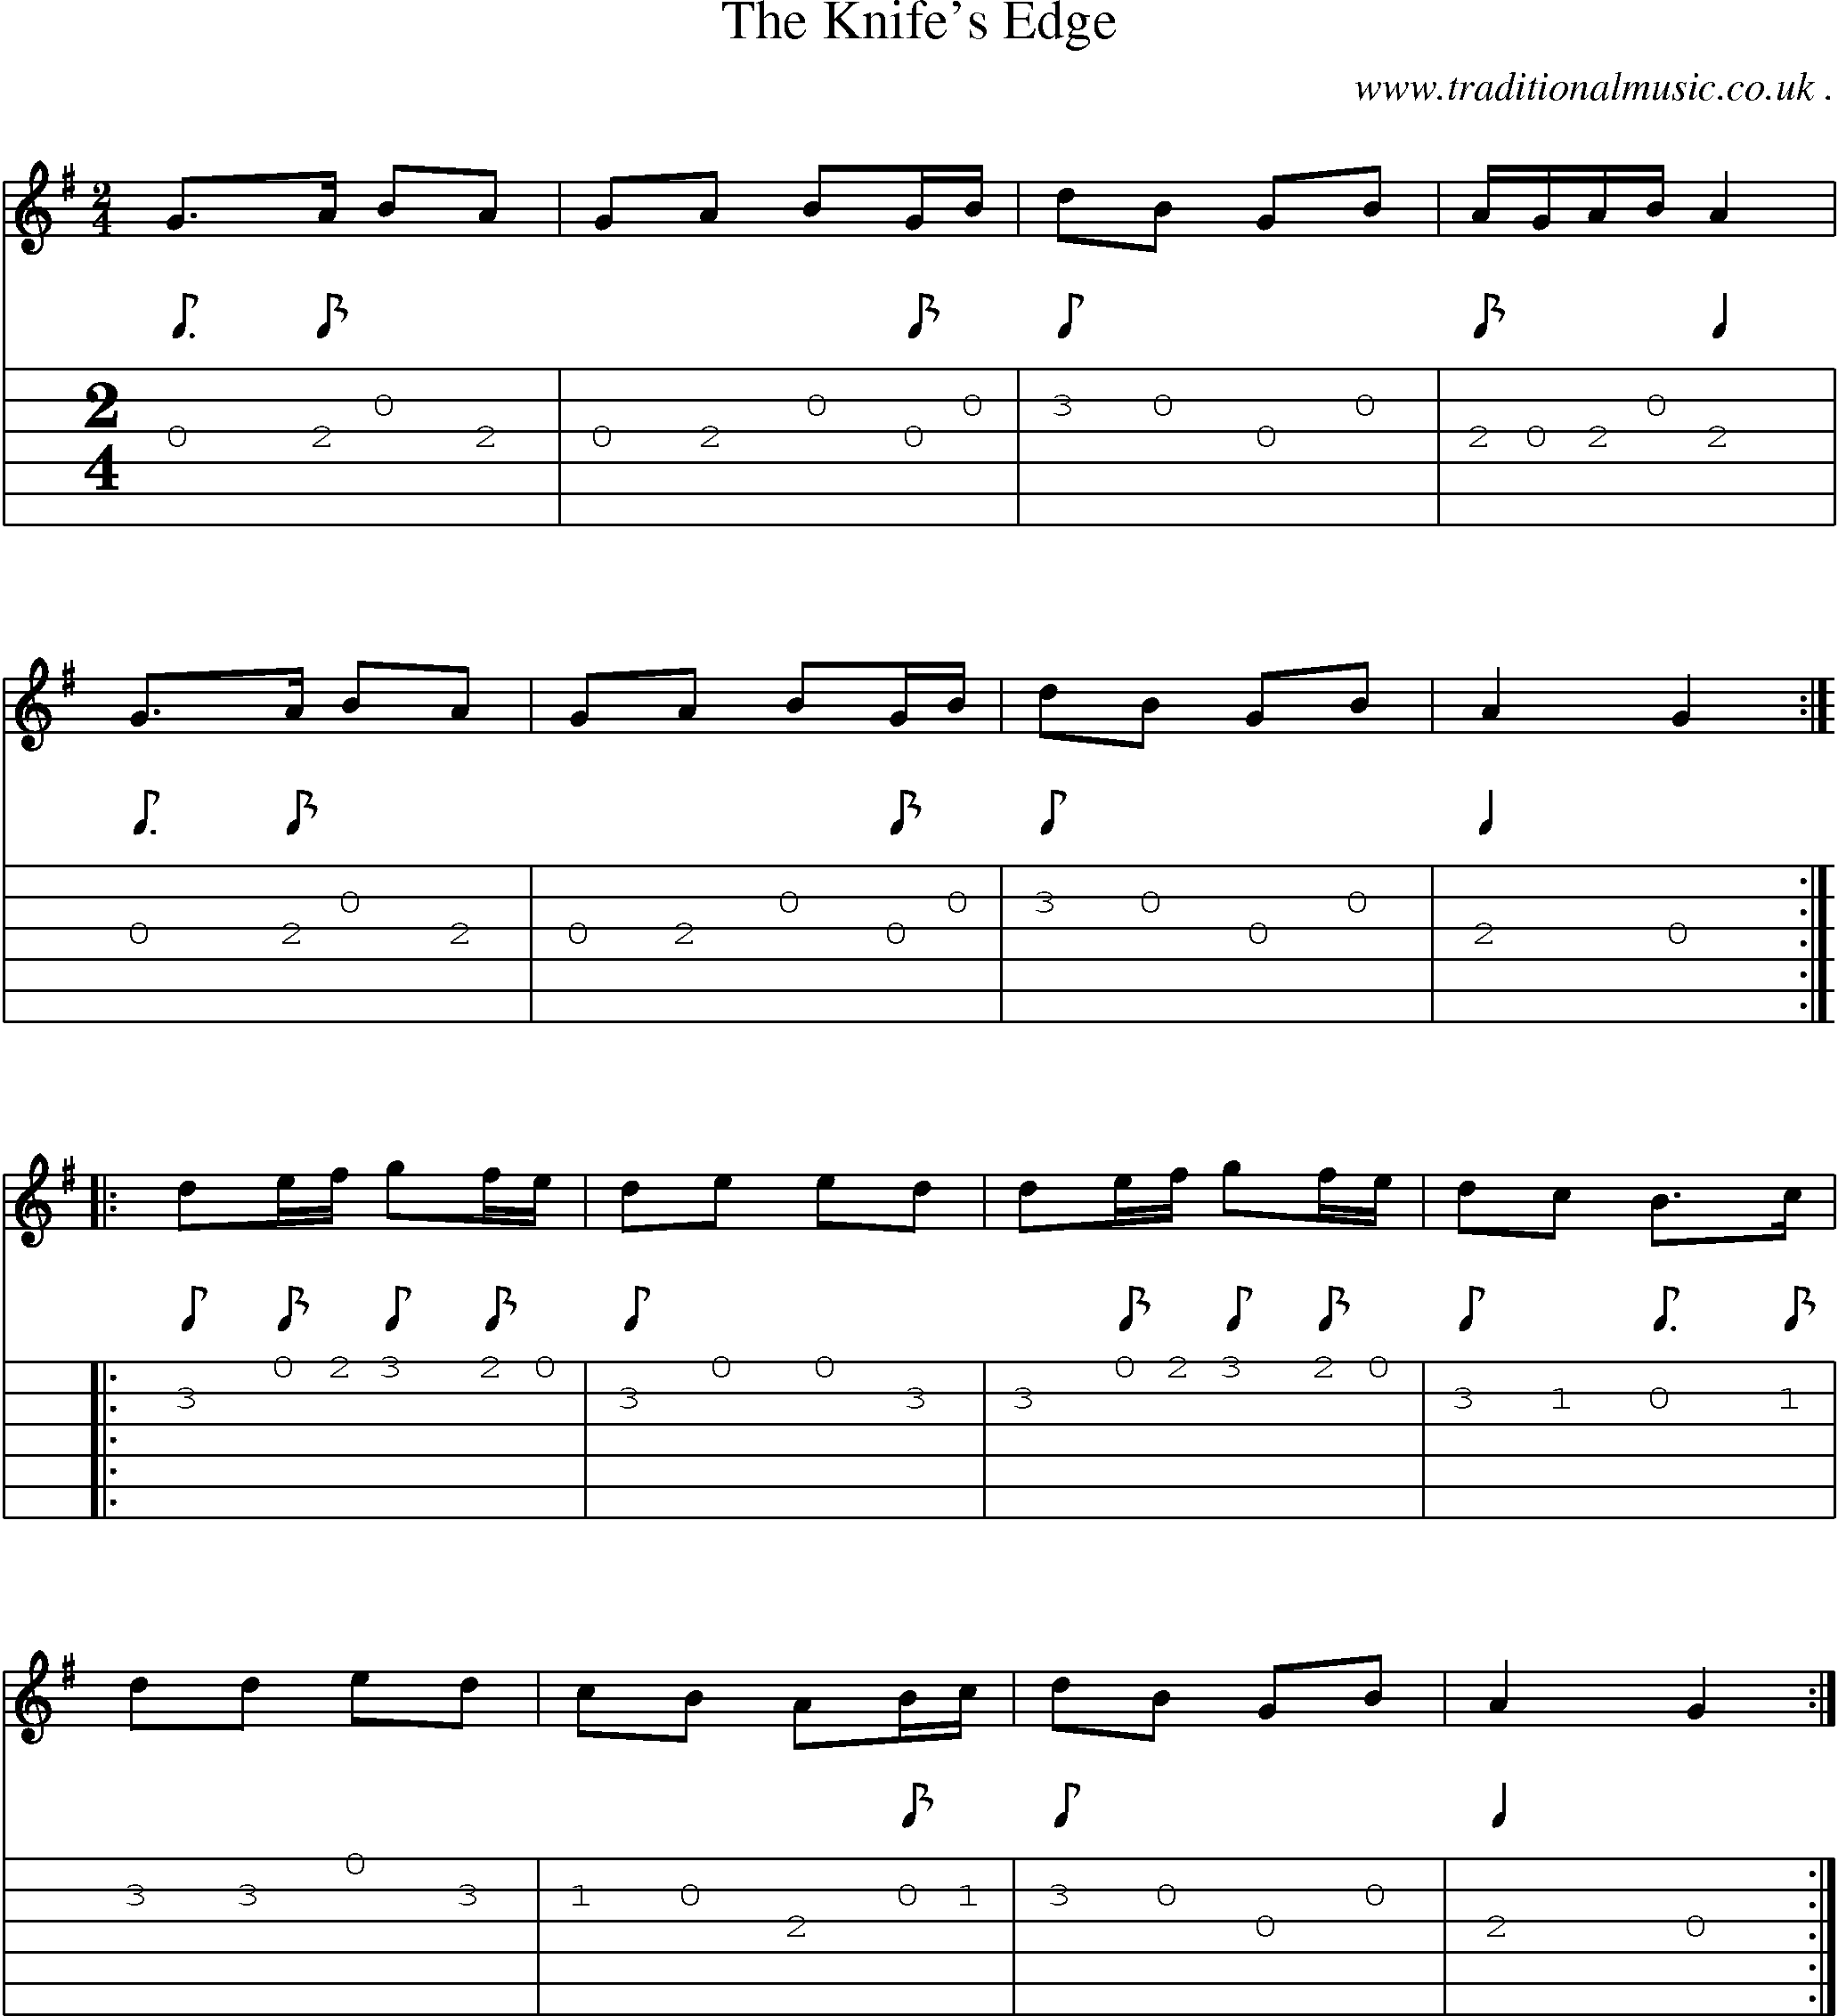 Sheet-Music and Guitar Tabs for The Knifes Edge